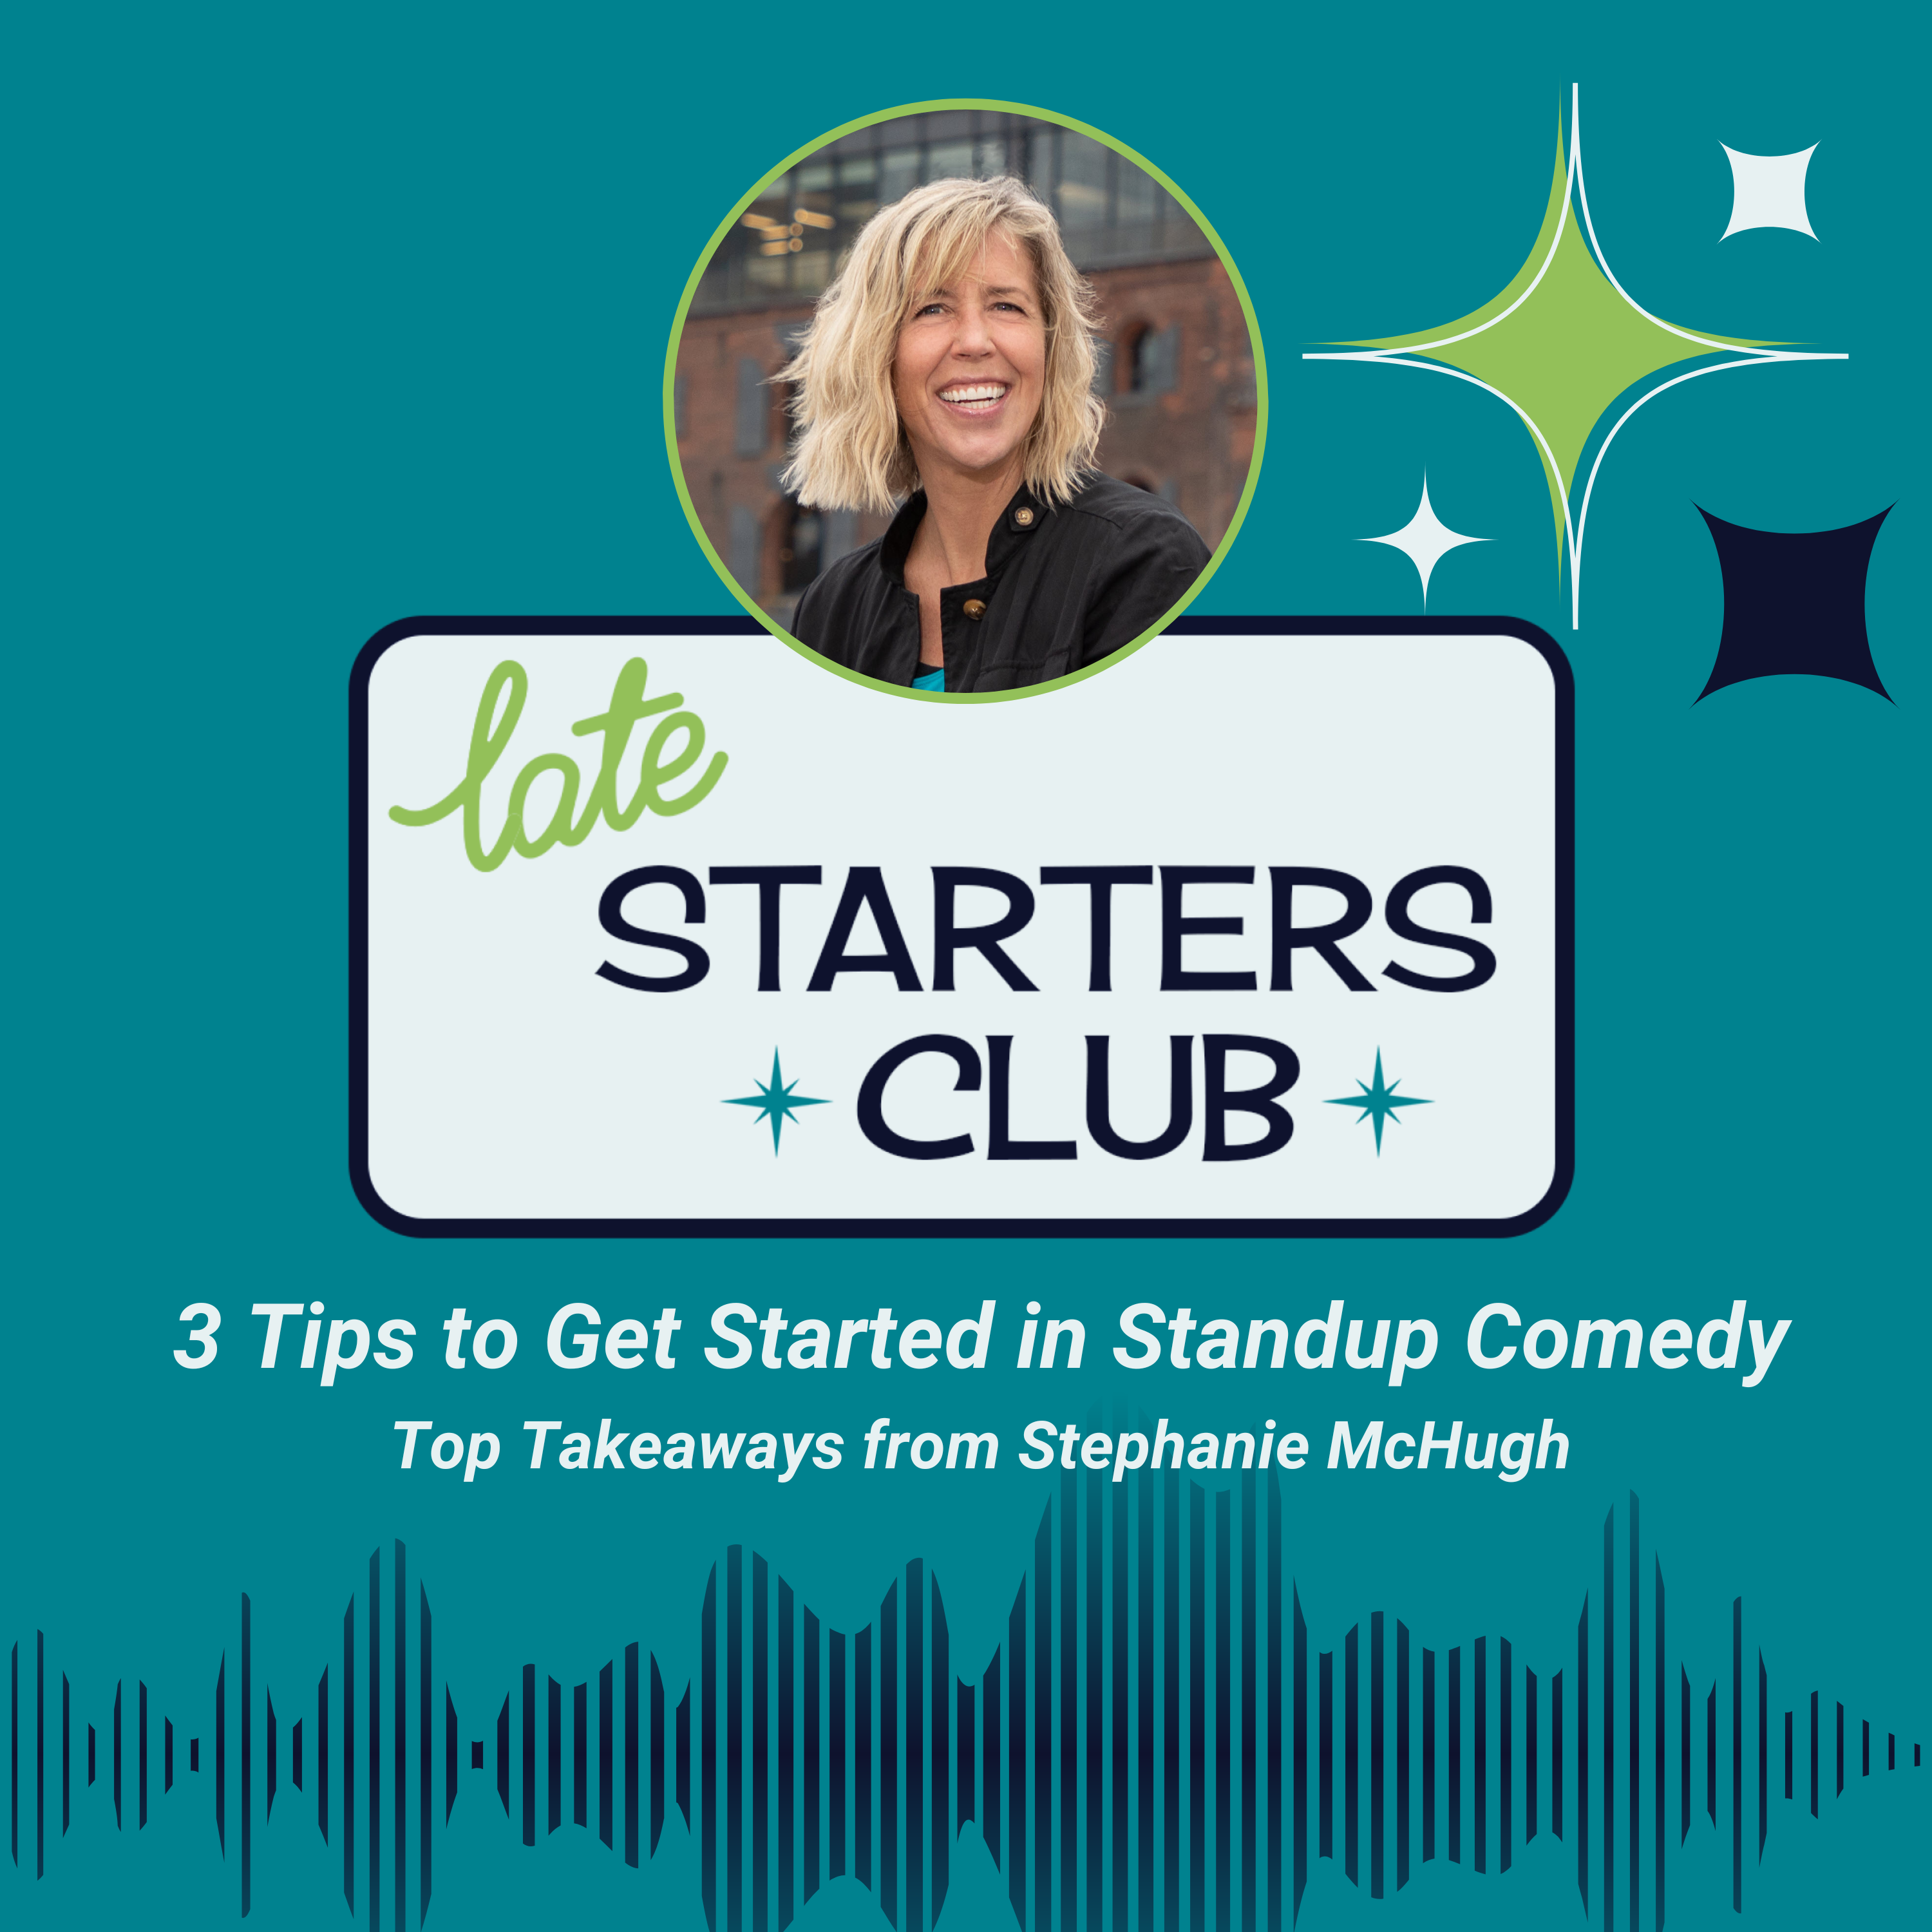 26: 3 Tips to Get Started in Standup Comedy Top Takeaways from Stephanie McHugh